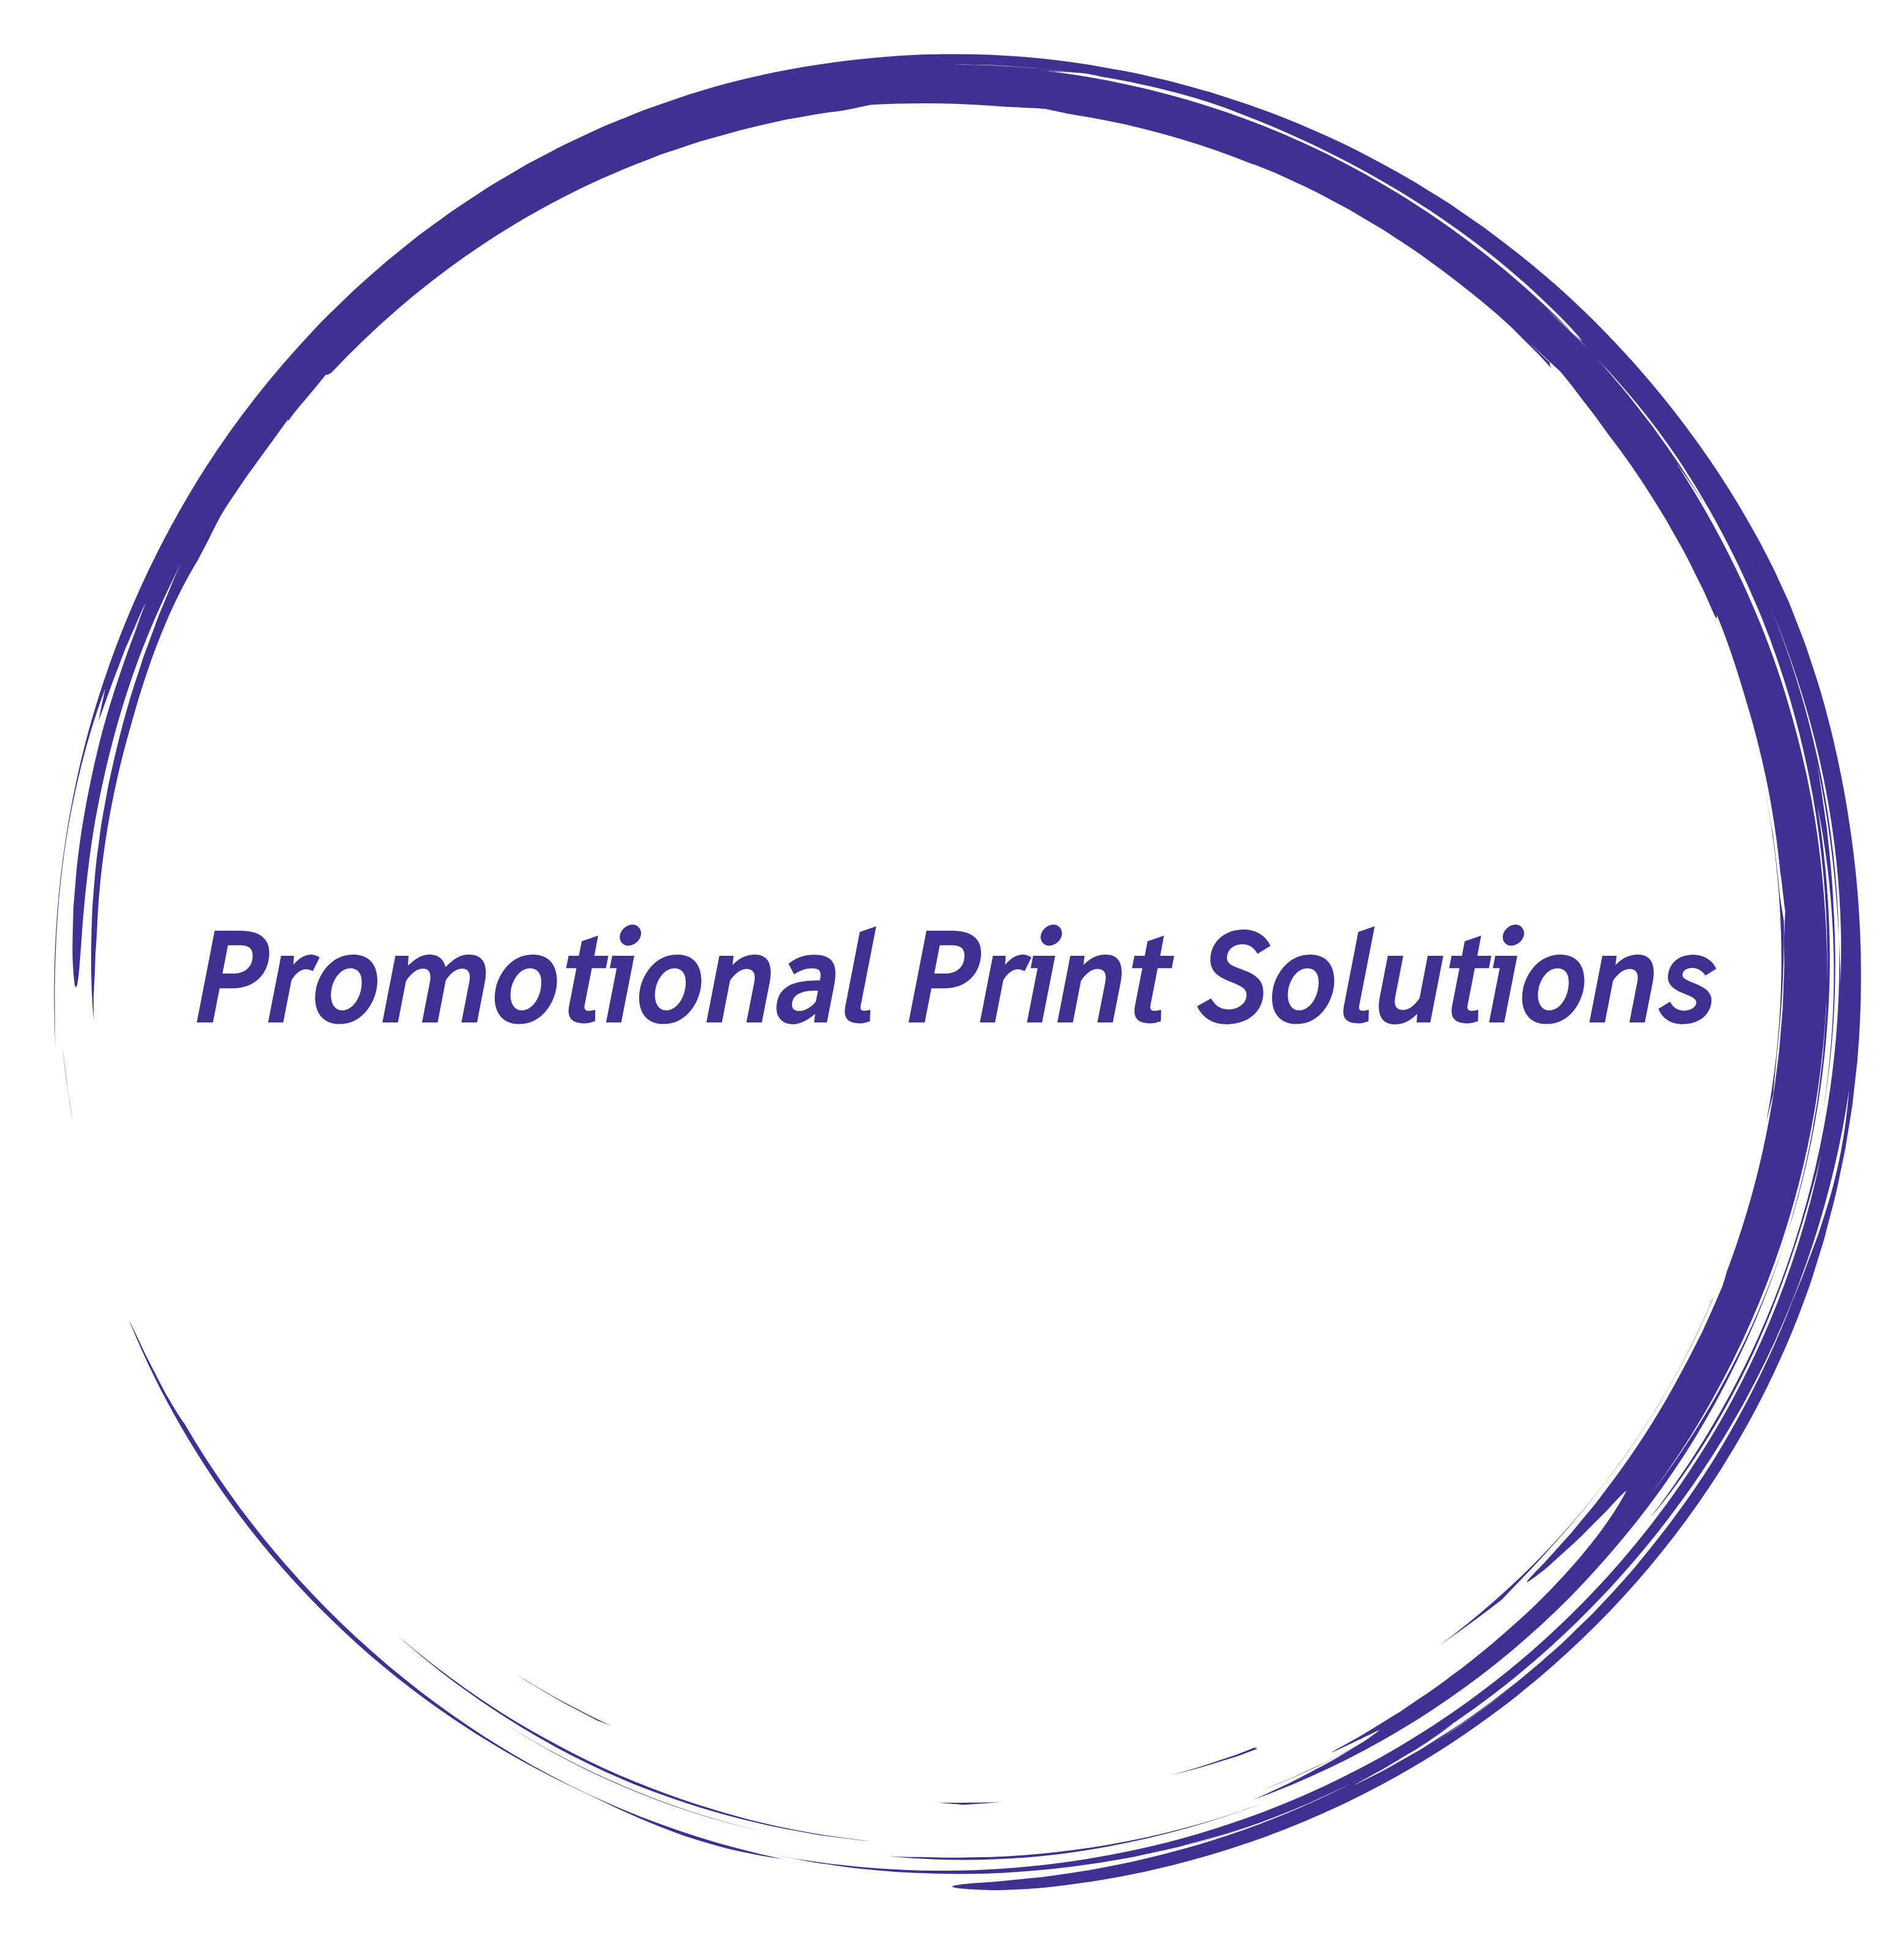 Promotional Print Solutions Logo